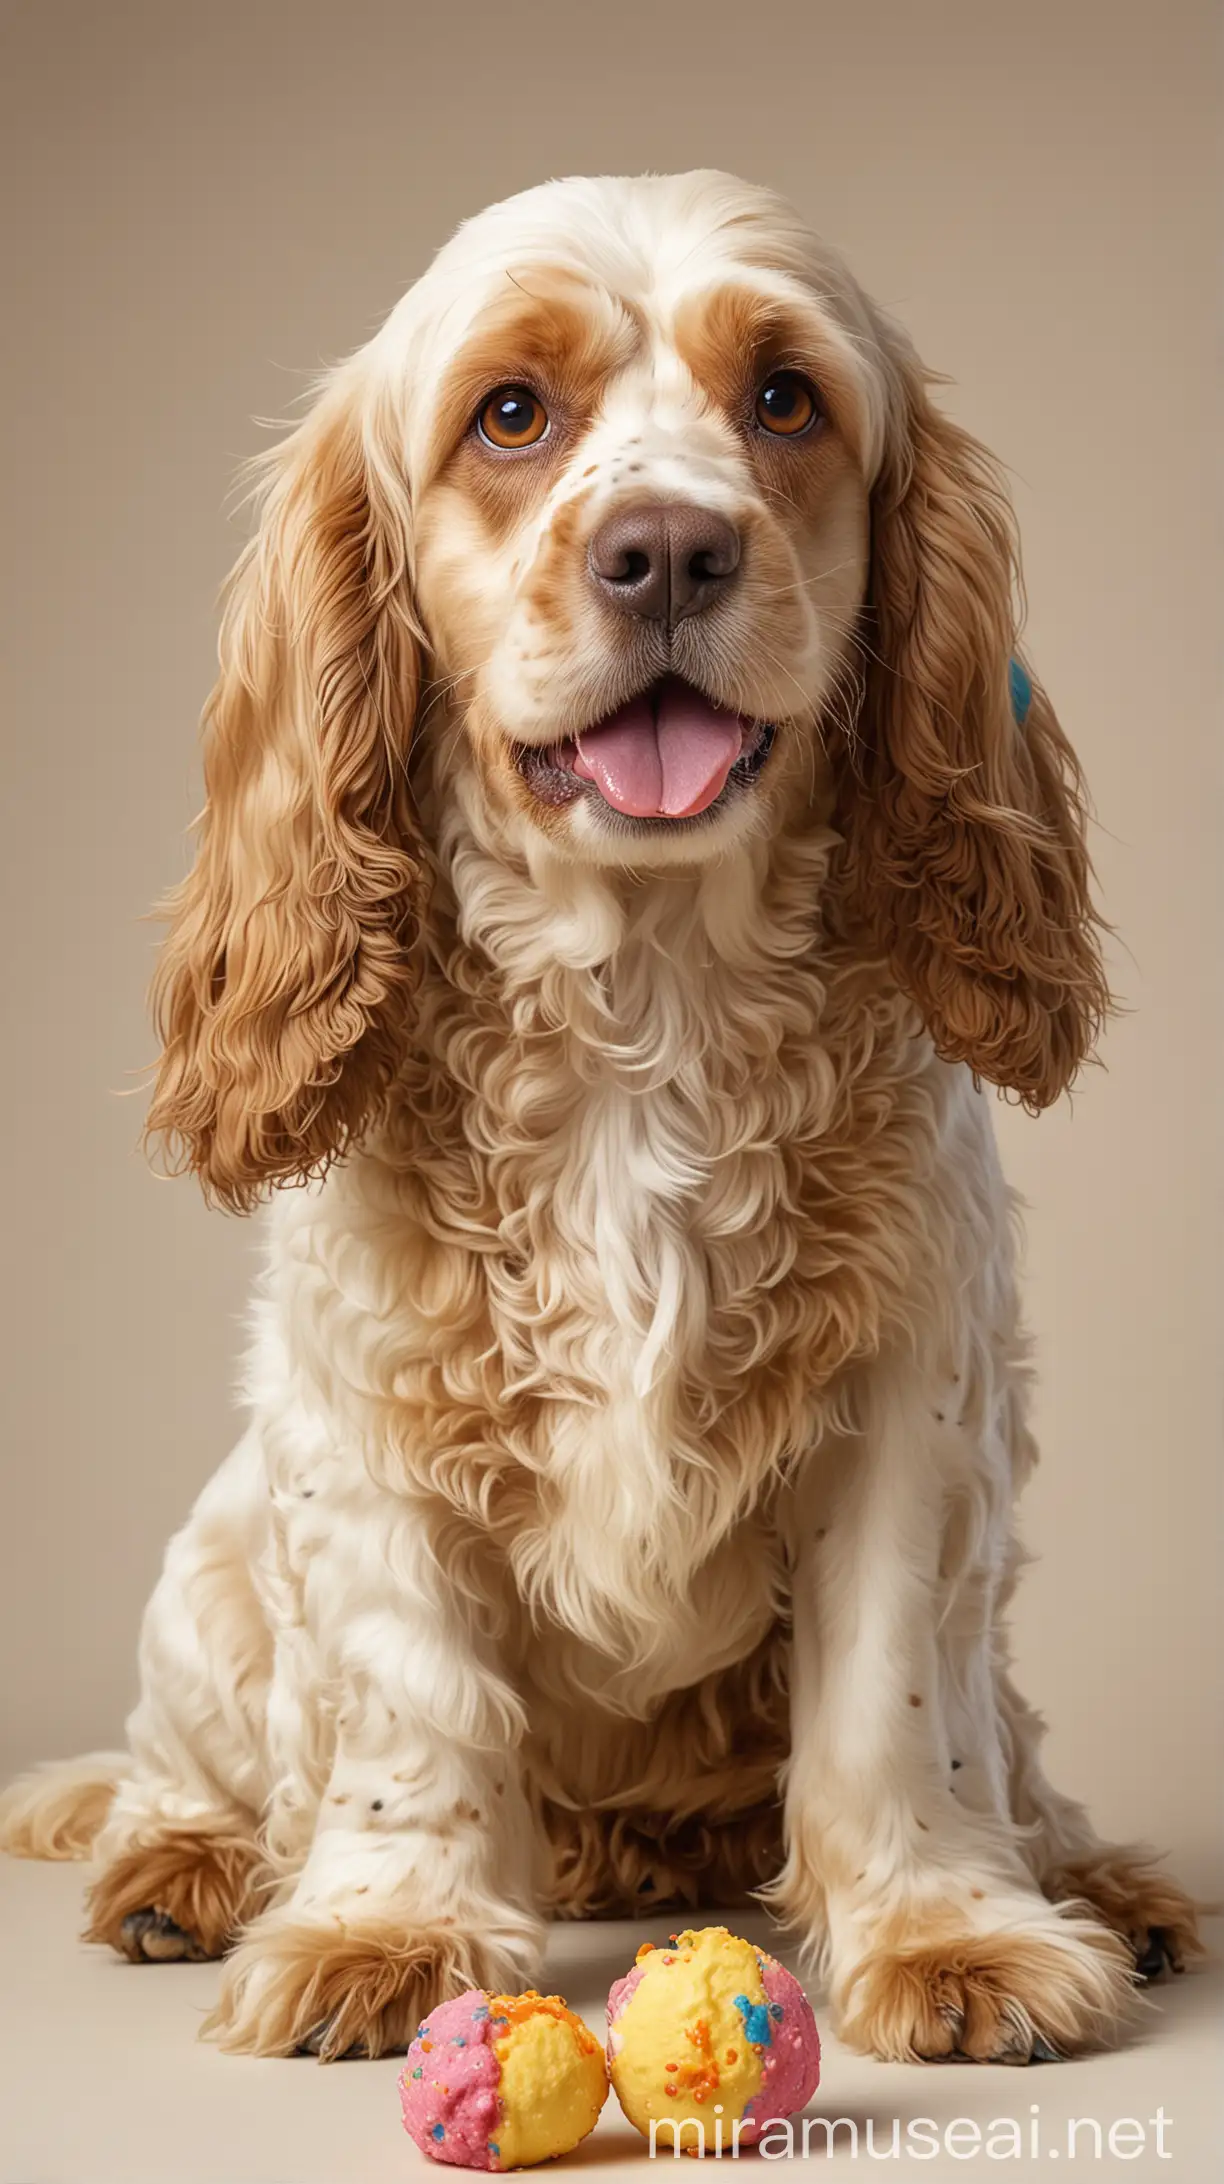 Adorable Cocker Spaniel with Colorful Treat Happy White and Beige Dog Portrait